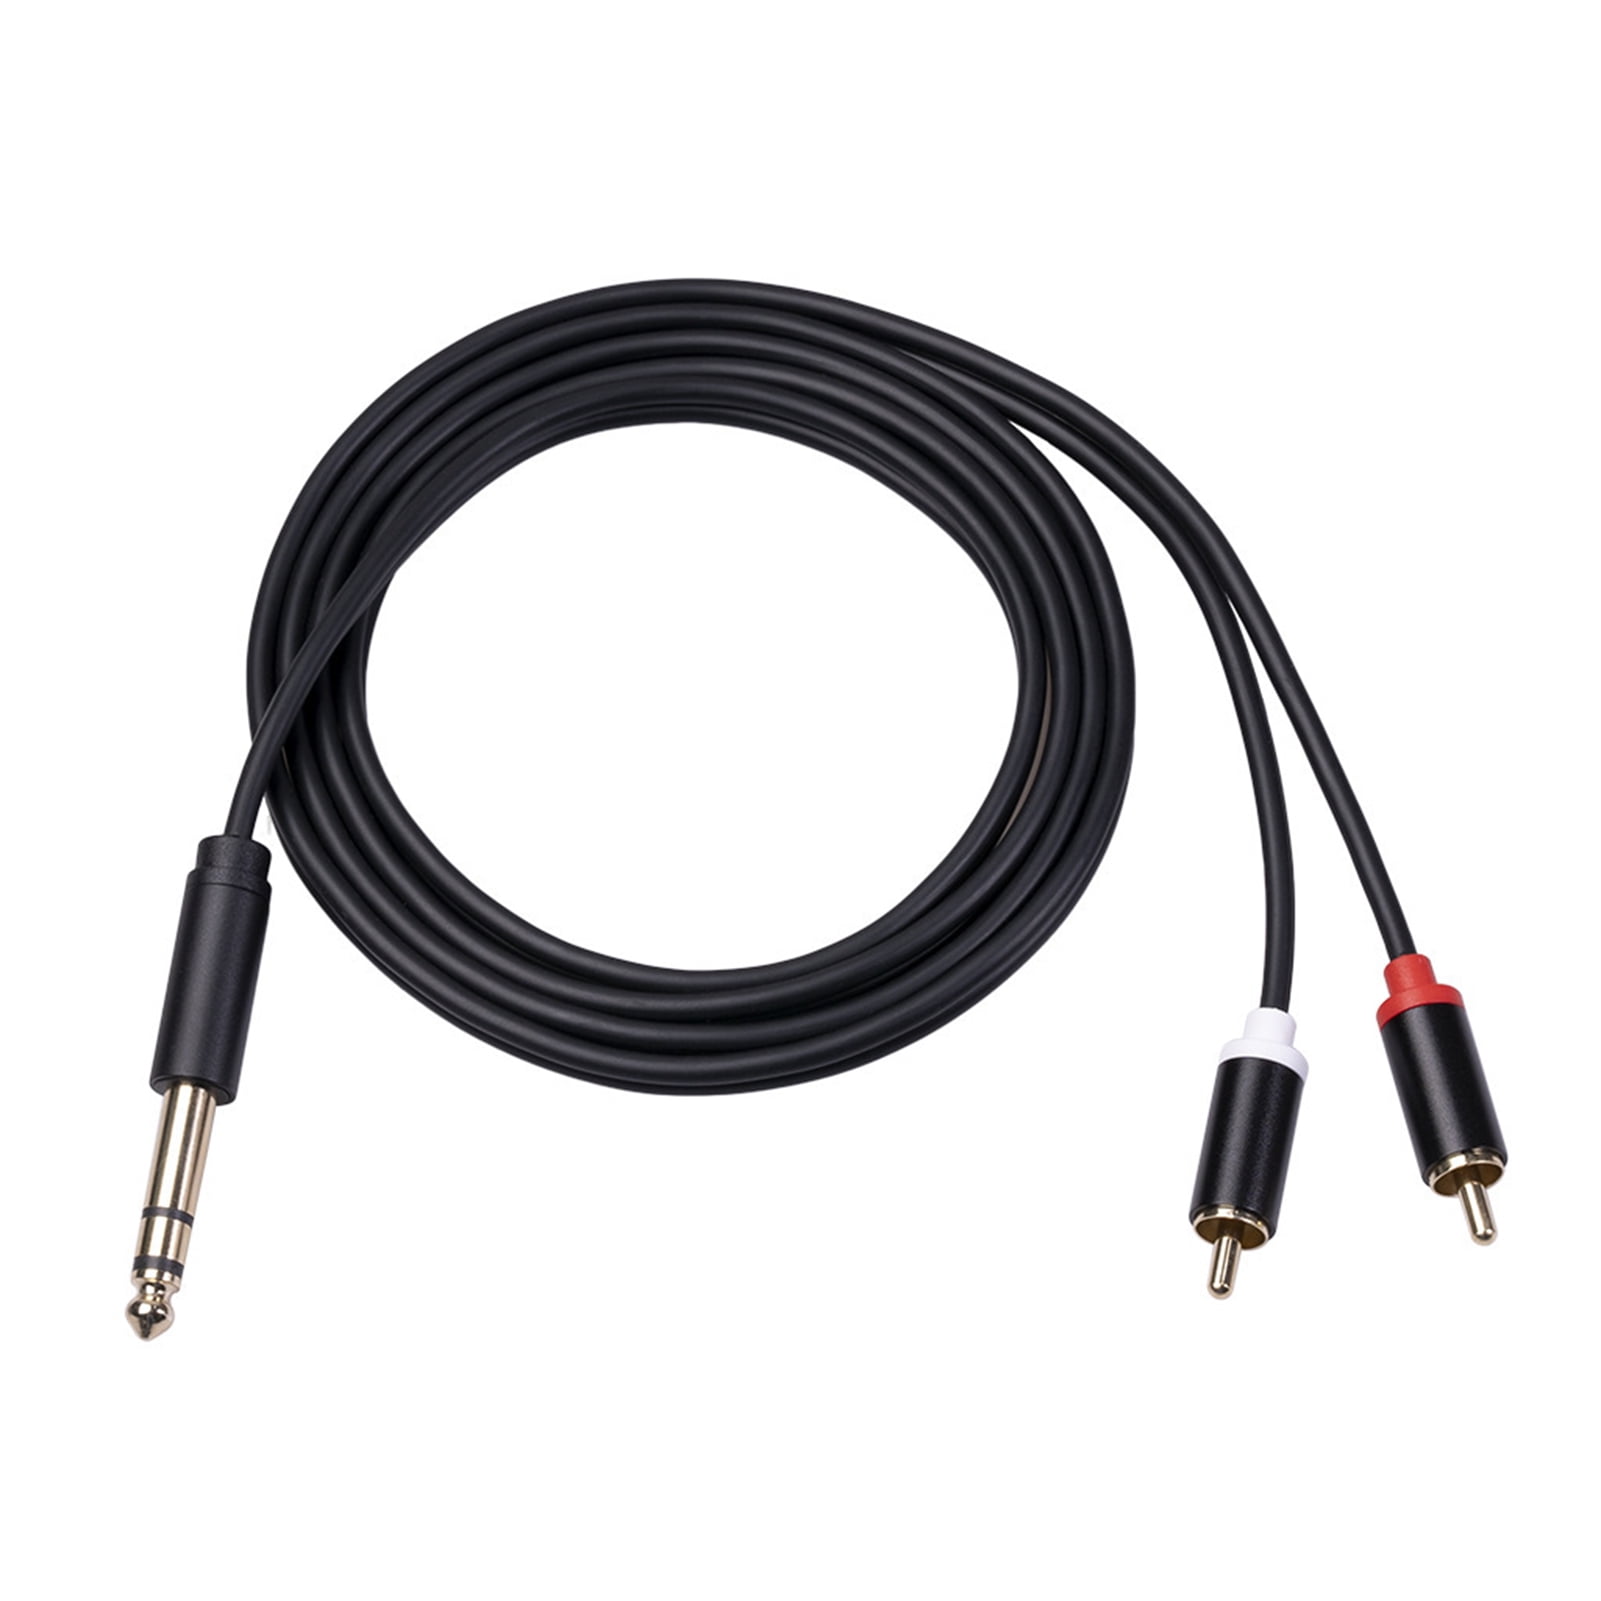 6 Feet TRS Stereo Male Jack Cable Converter for Keyboard & Audio Equipment Electronic Musical Instrument Signal Output 3.5M-5 DIN TNP MIDI Cable Adapter 5 Pin Din Plug Male To 3.5mm 1/8in 